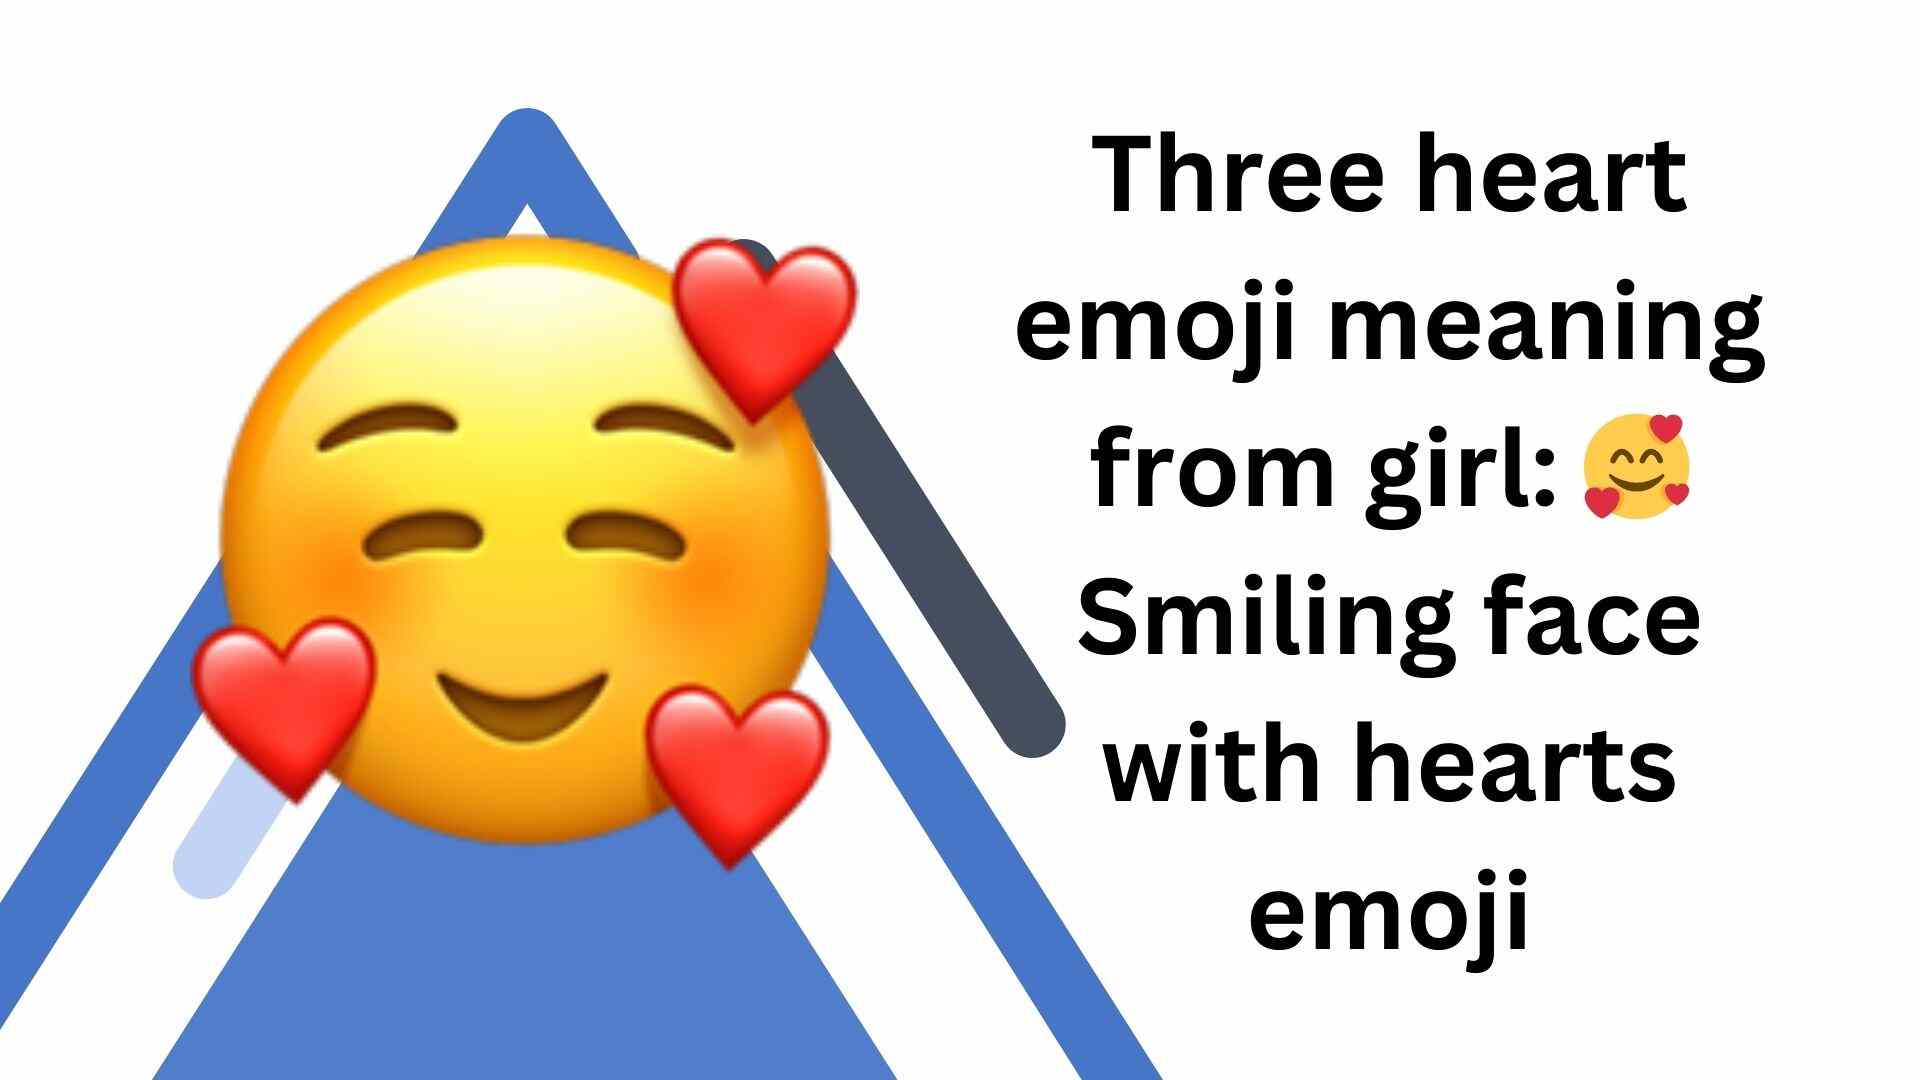 Three heart emoji meaning from girl